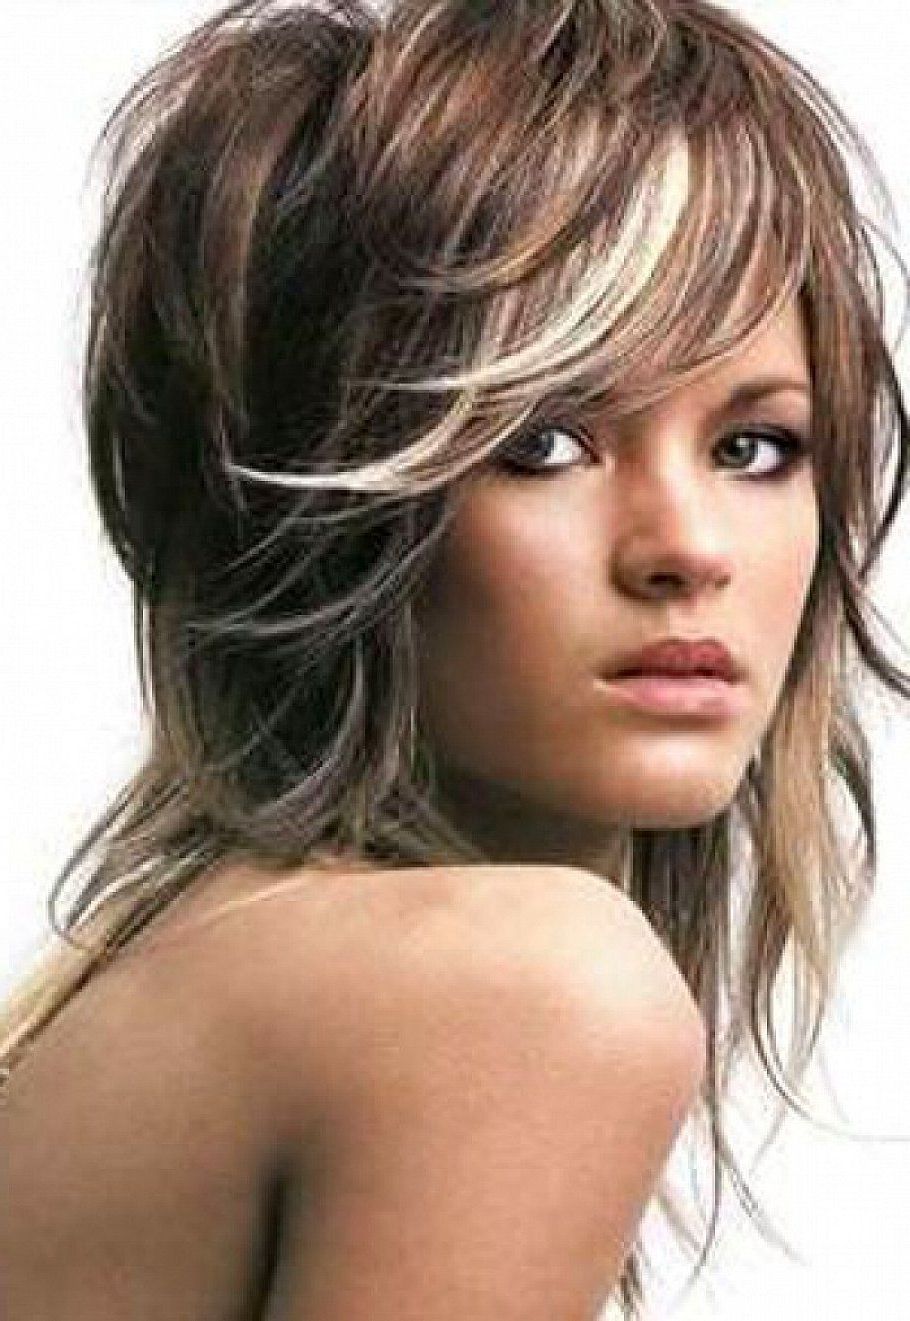 Most Popular Parisian Shag Haircuts For Thin Hair Within Pin On Fine Haircut Styles (View 10 of 20)